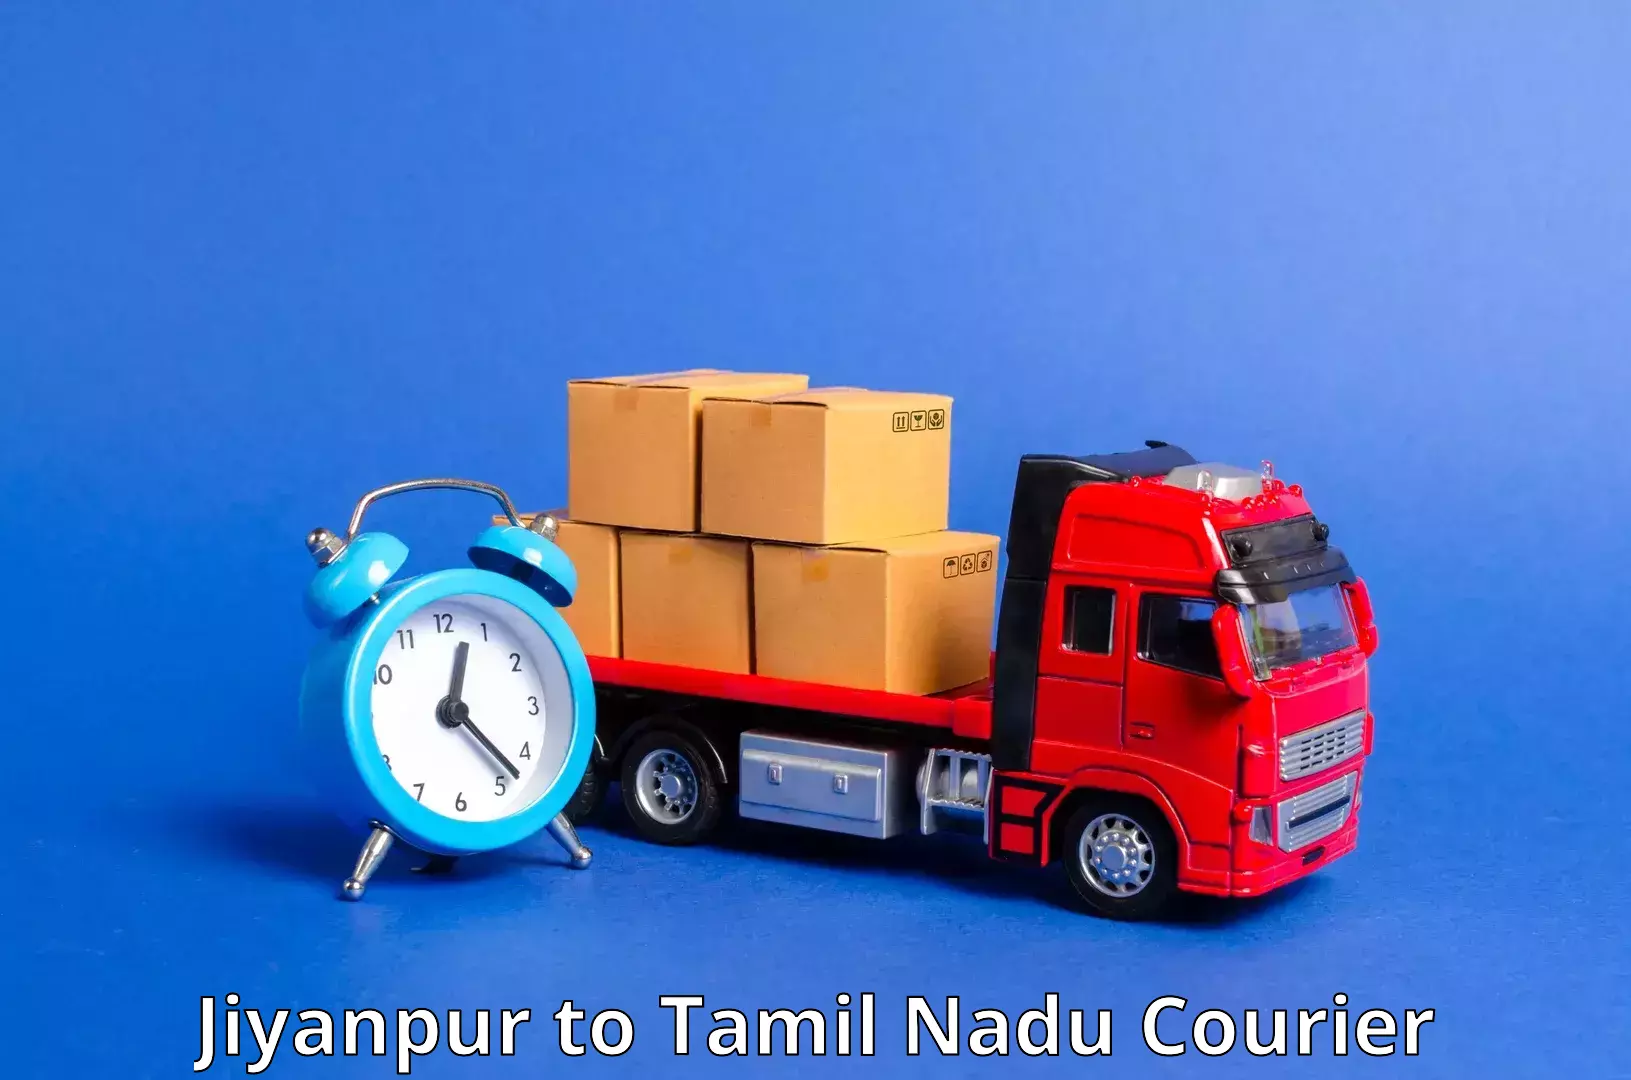 Full-service courier options Jiyanpur to Anna University Chennai